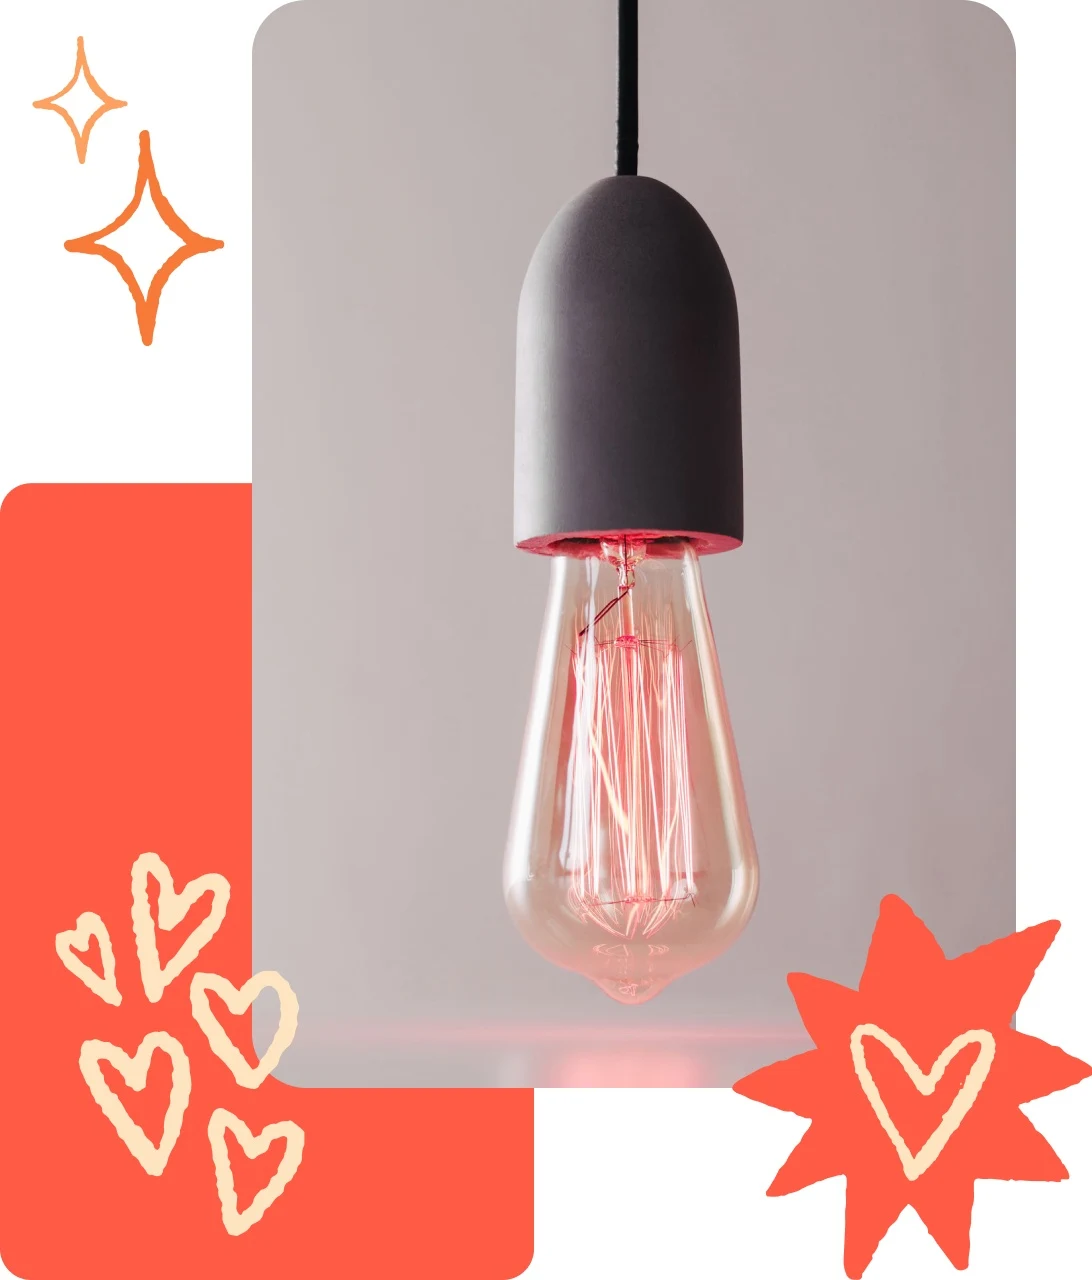 Pin collage of a modern pendant with lightbulb, orange pin and heart illustrations